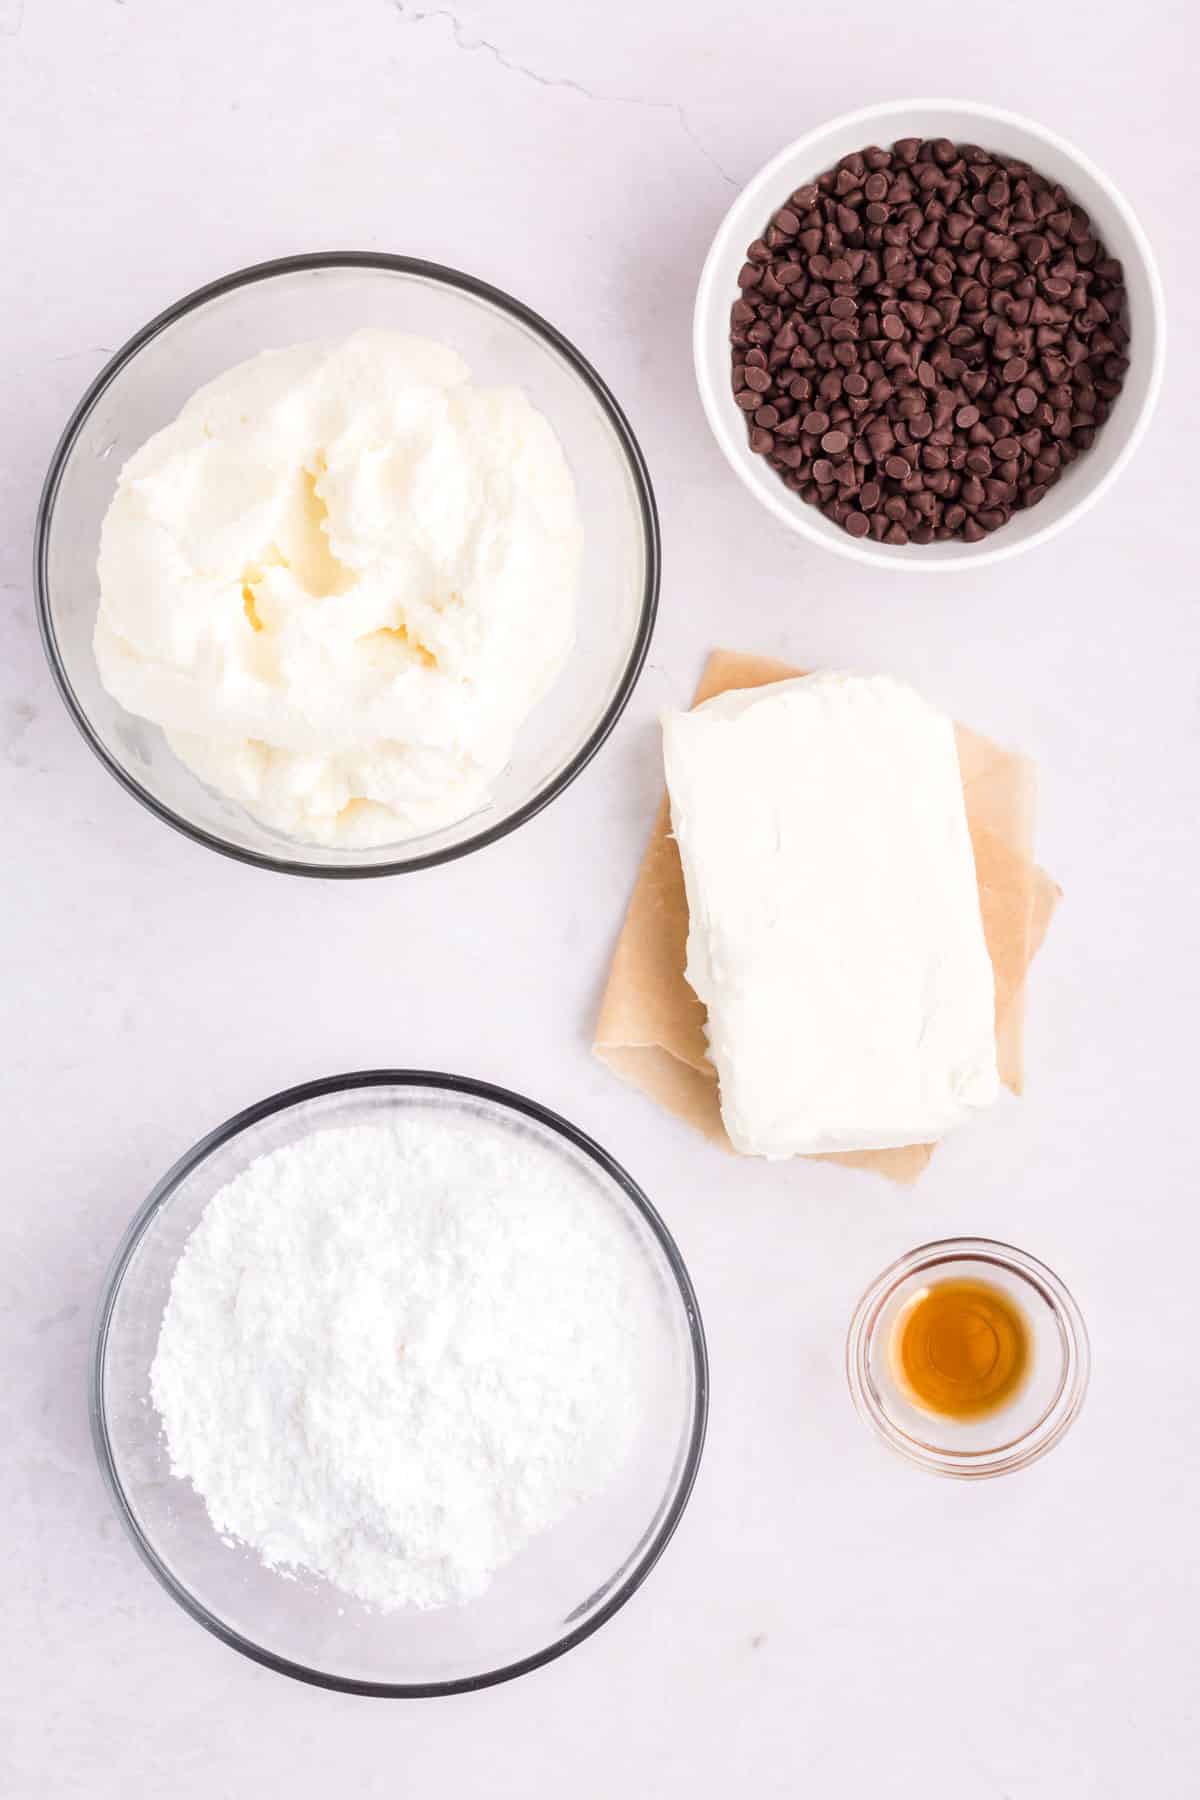 Cannoli dip ingredients are the following: powdered sugar, cream cheese, whole milk ricotta cheese, vanilla extract, and mini chocolate chips.